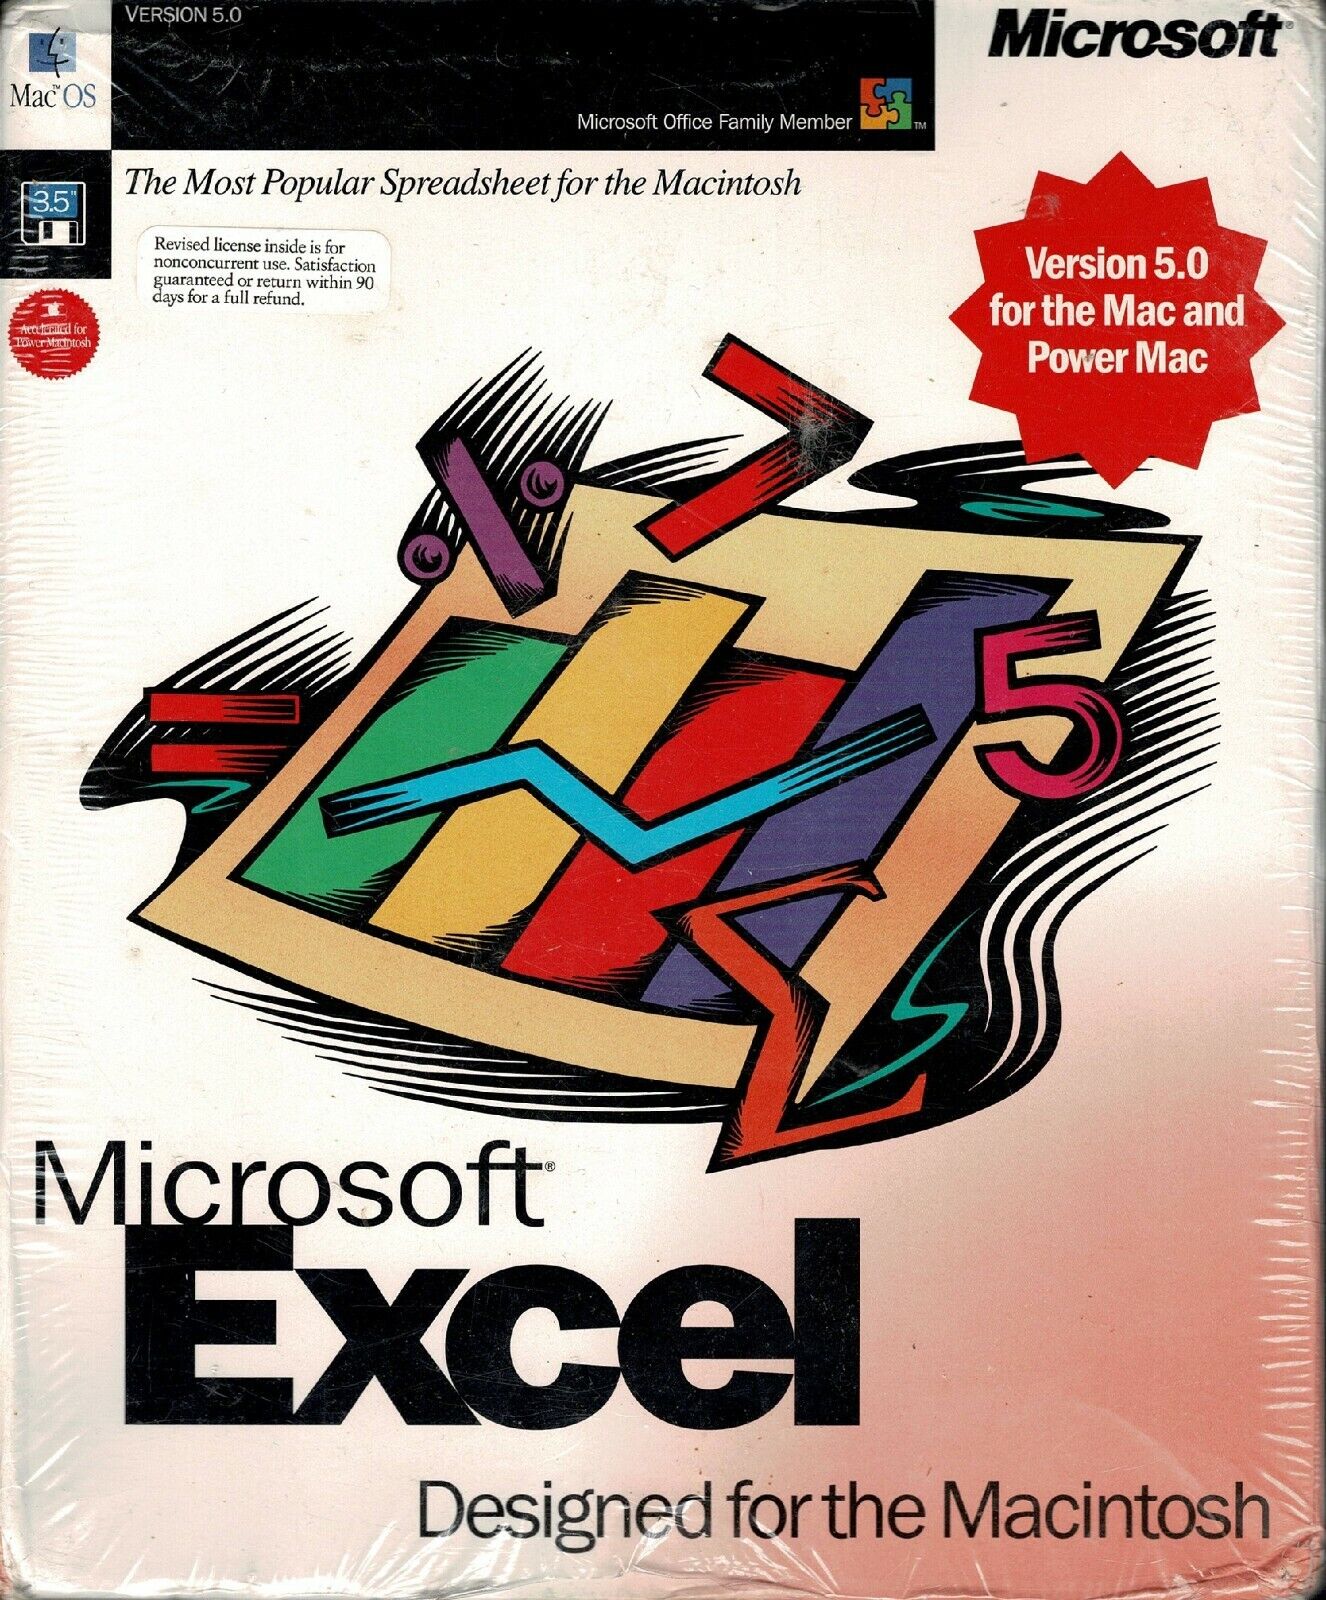 Microsoft Excel Version 5.0 For Mac and Power CIB 3.5\